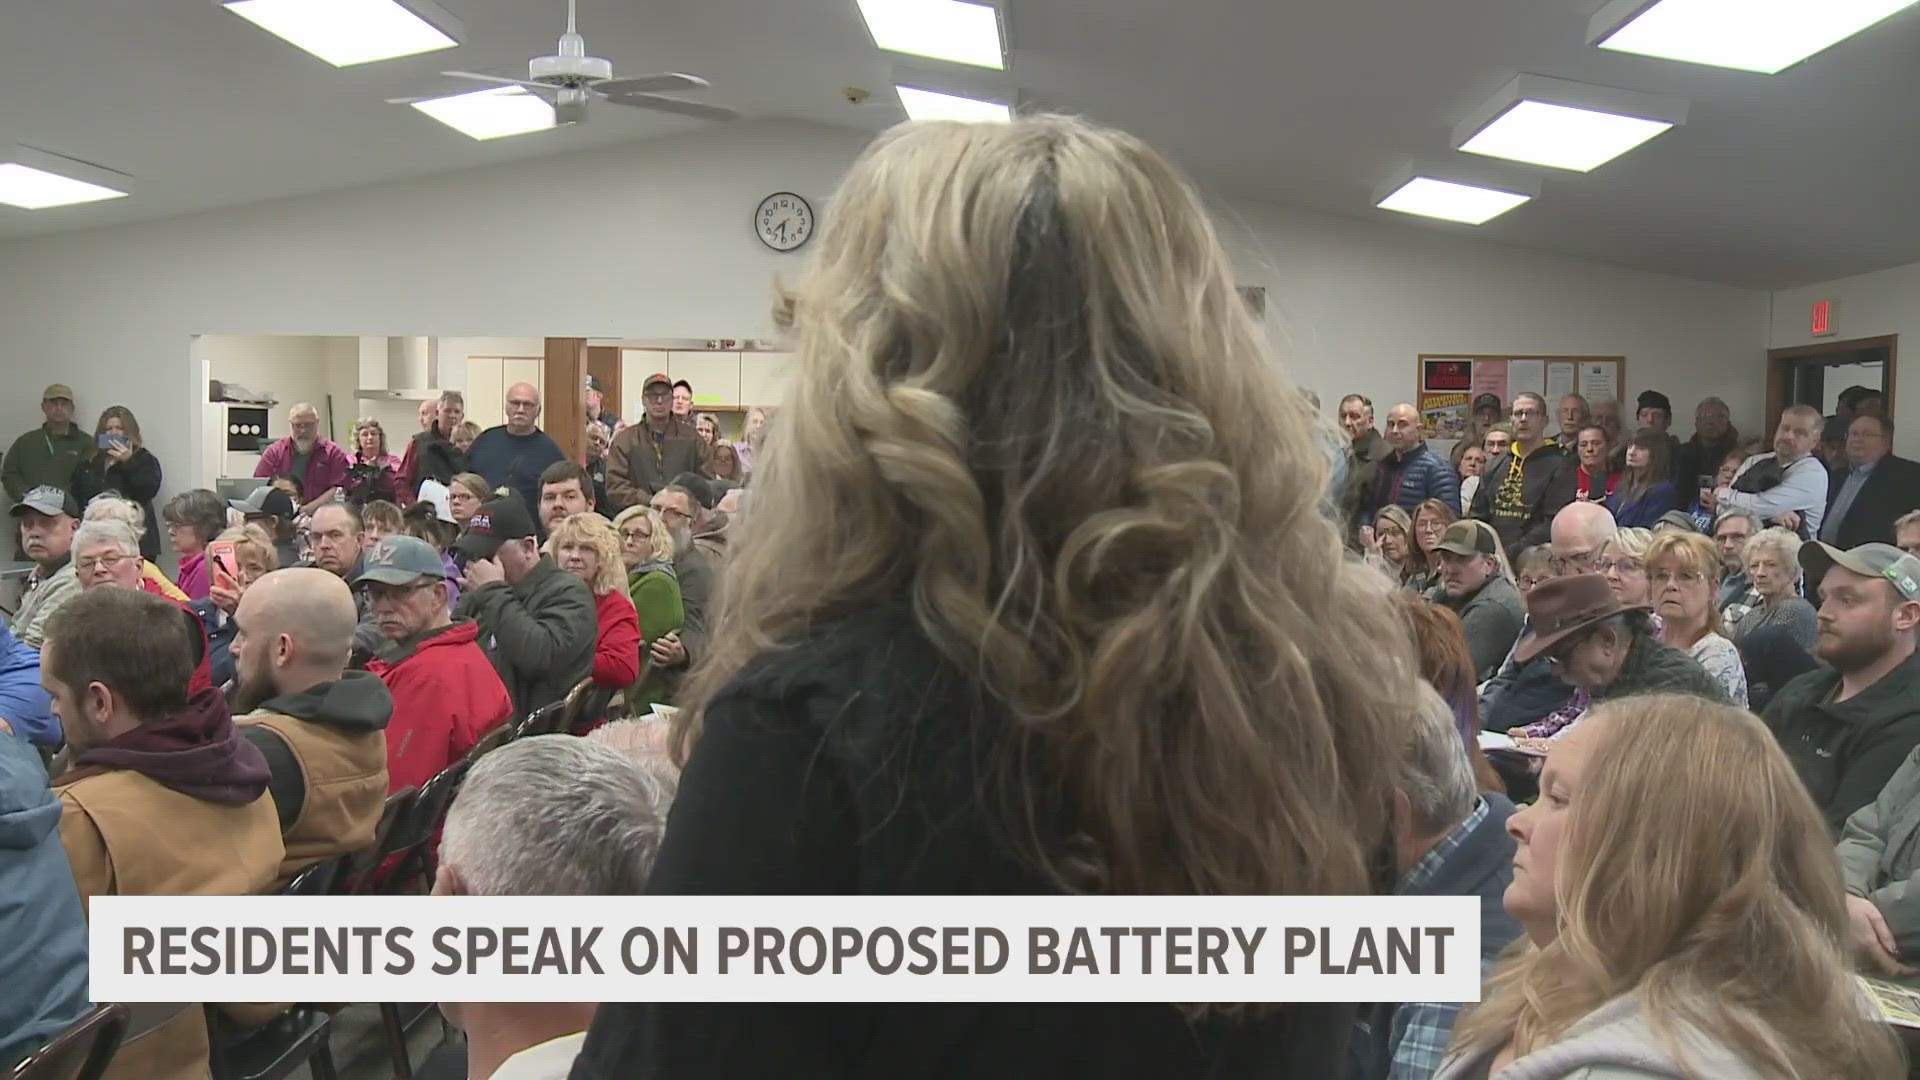 While not on the Green Charter Township meeting agenda, residents near Green and Big Rapids Townships gathered to voice their concerns during public comment.